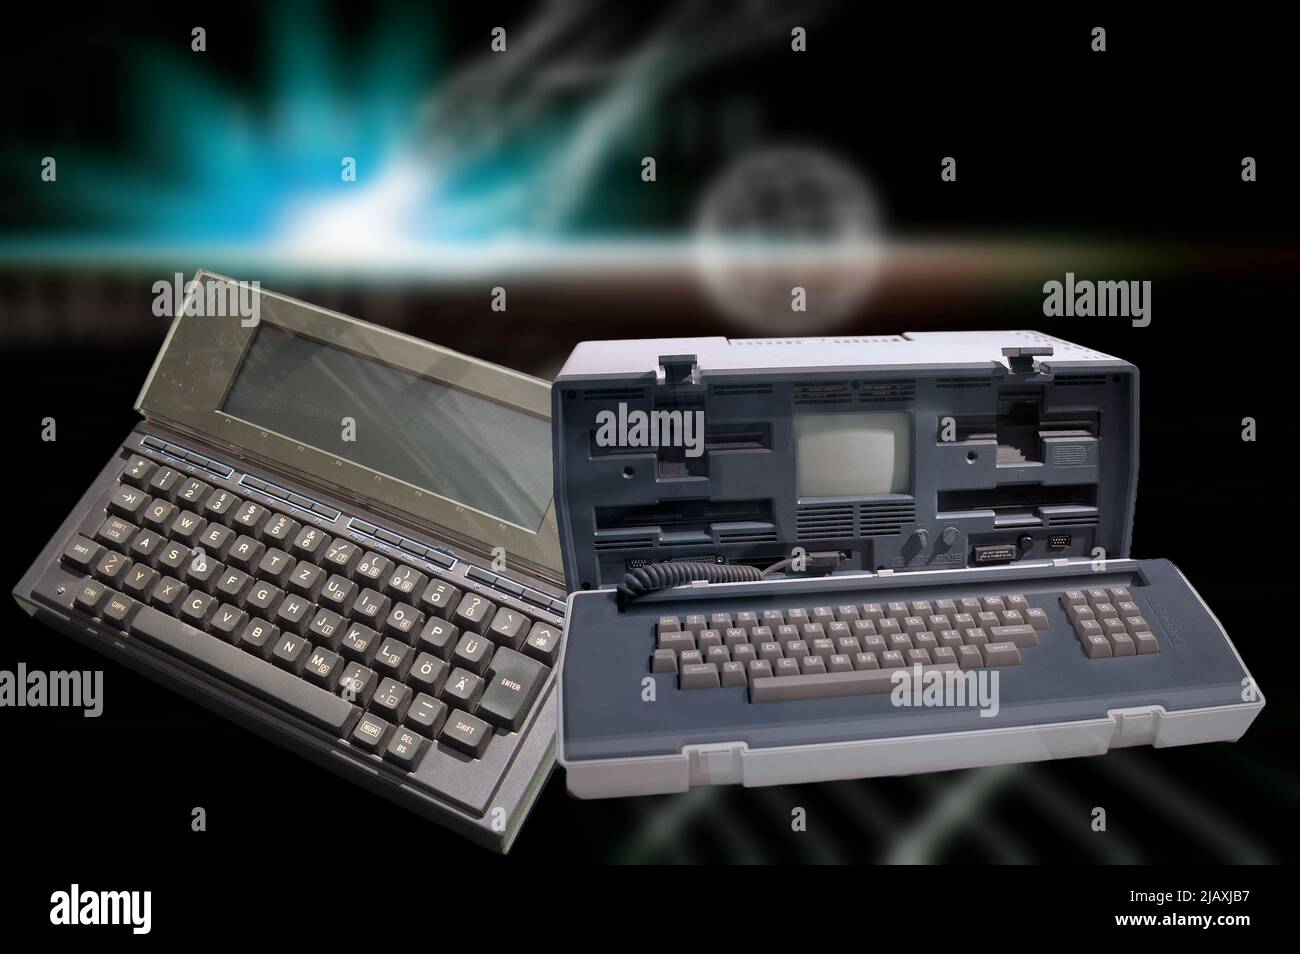 Computer Archaeology - Osborne I and the Olivetti M10 both from 1983, represent the first laptops at the beginning of the computer revolution Stock Photo